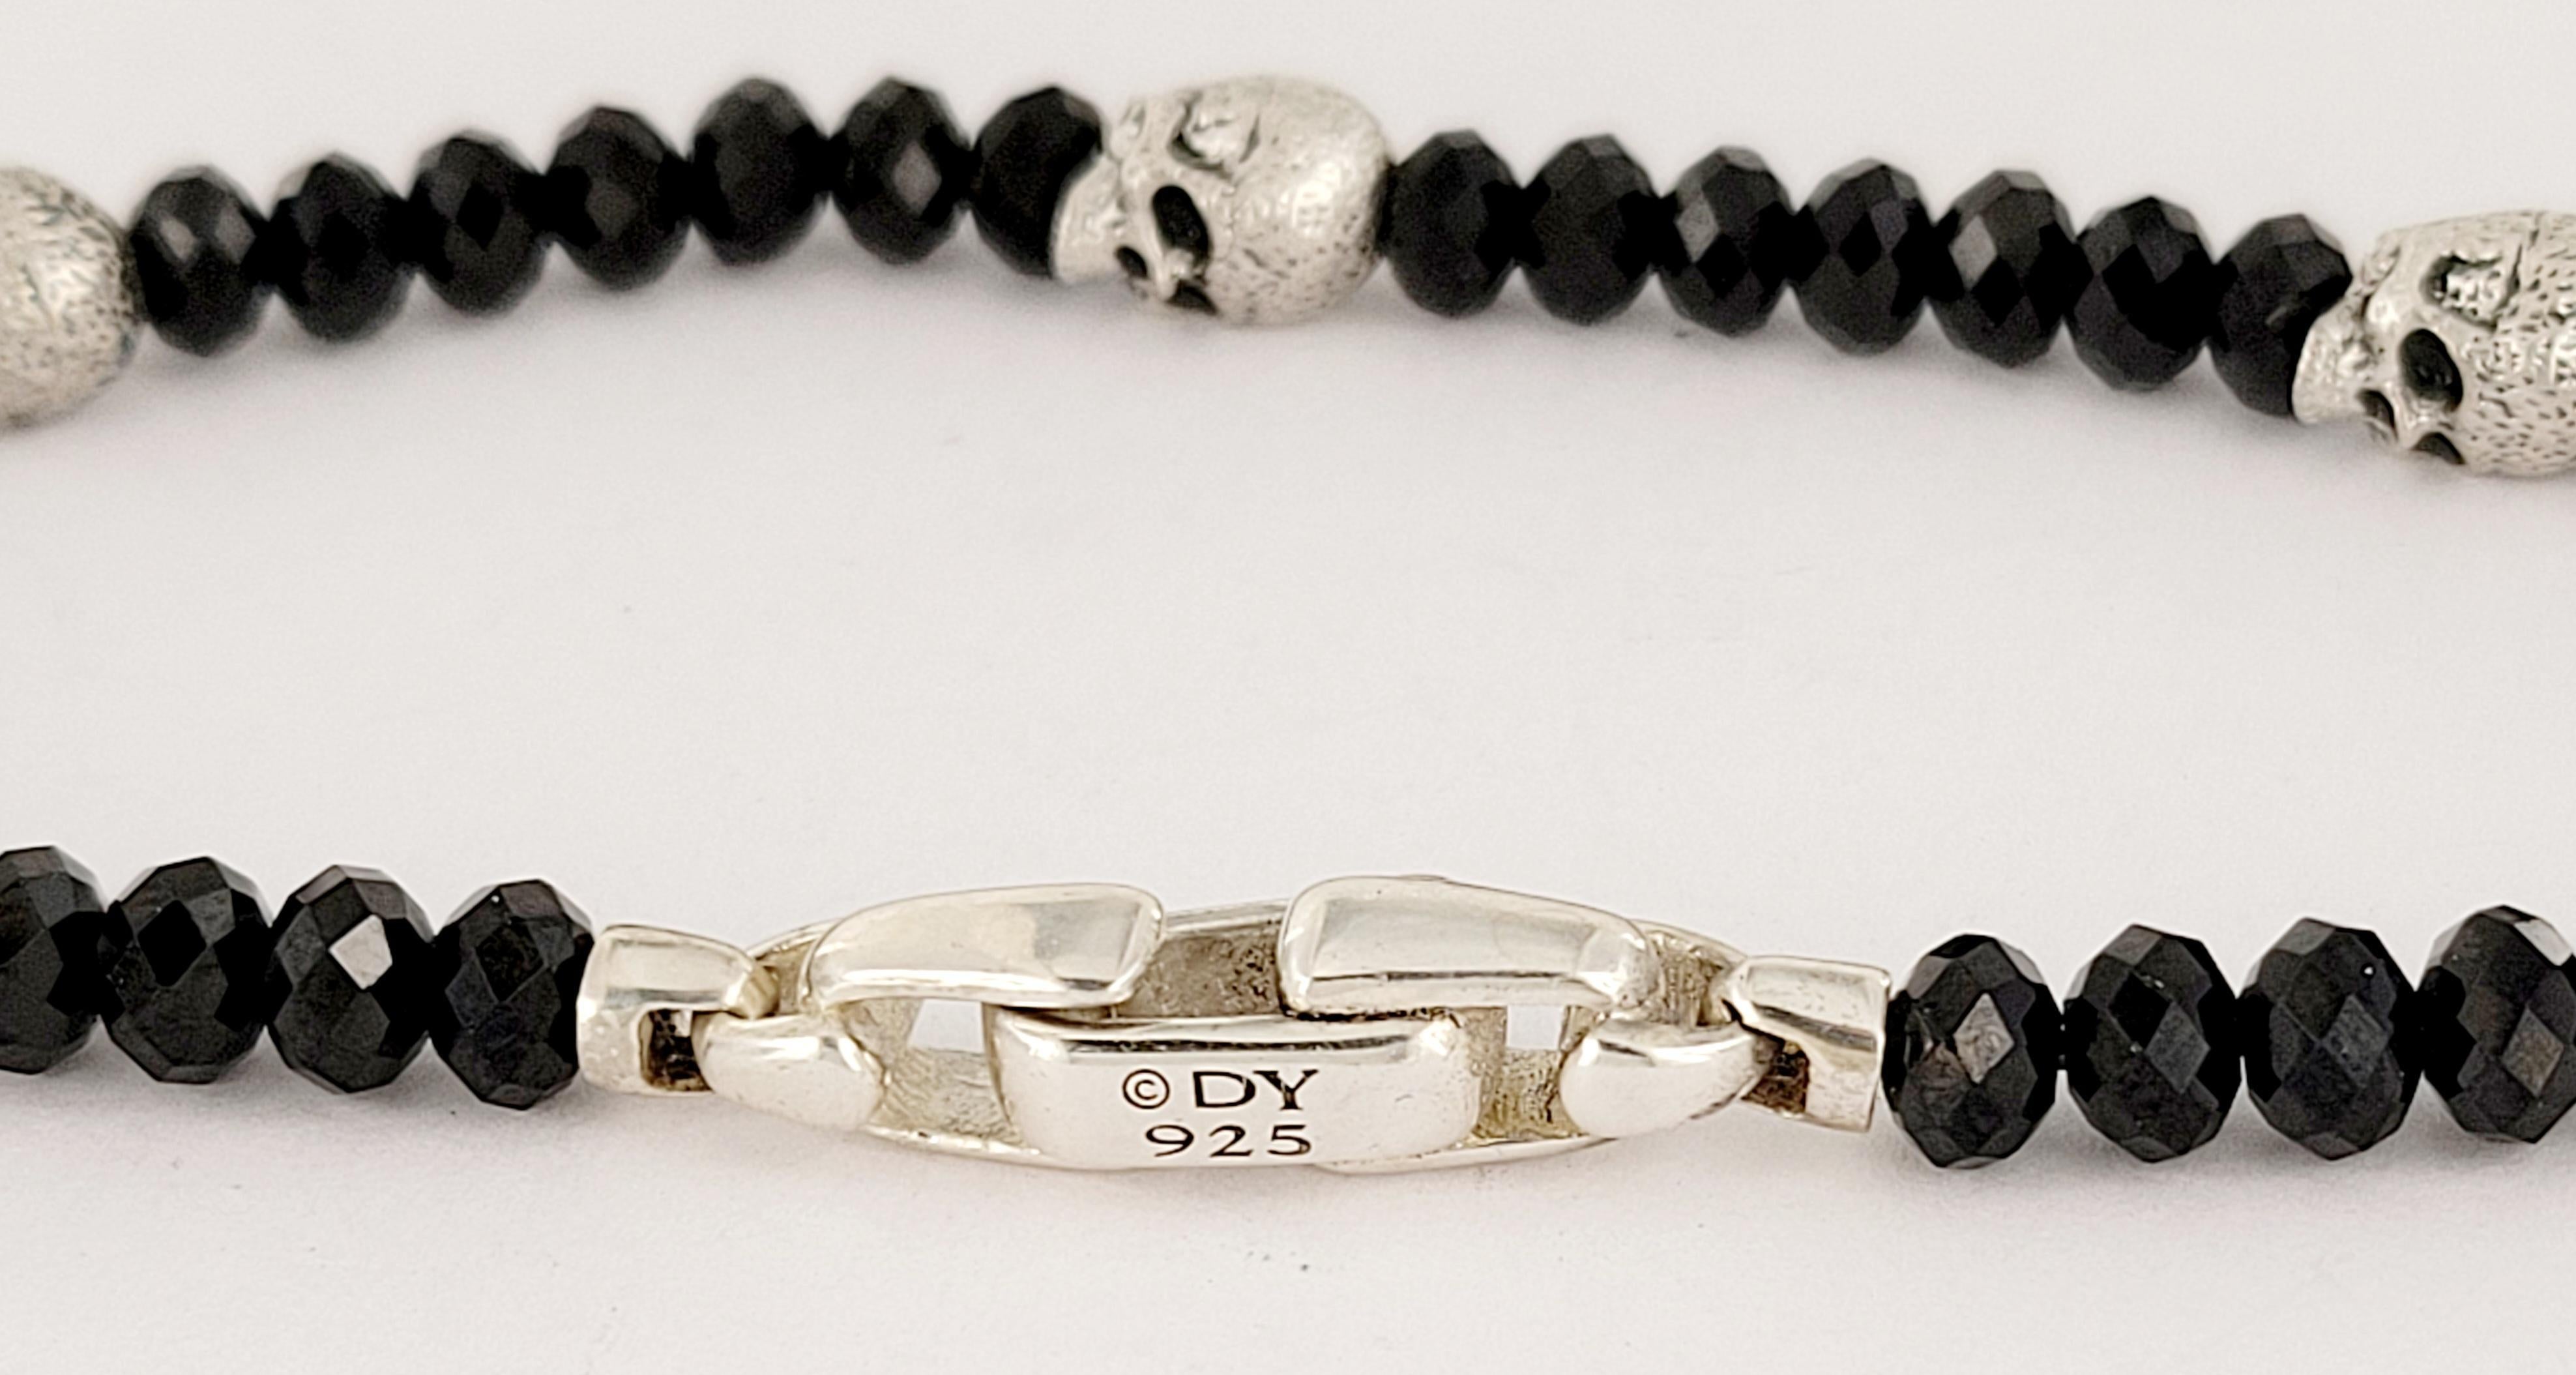 David Yurman 
Black Spinel & Three Skulls 
Material Sterling Silver 
Metal Purity95
Bracelet Length 8.5mm from end to end
Bracelet Width 5mm
Weight 15.6gr 
Condition New, never worn
Comes with David Yurman Pouch